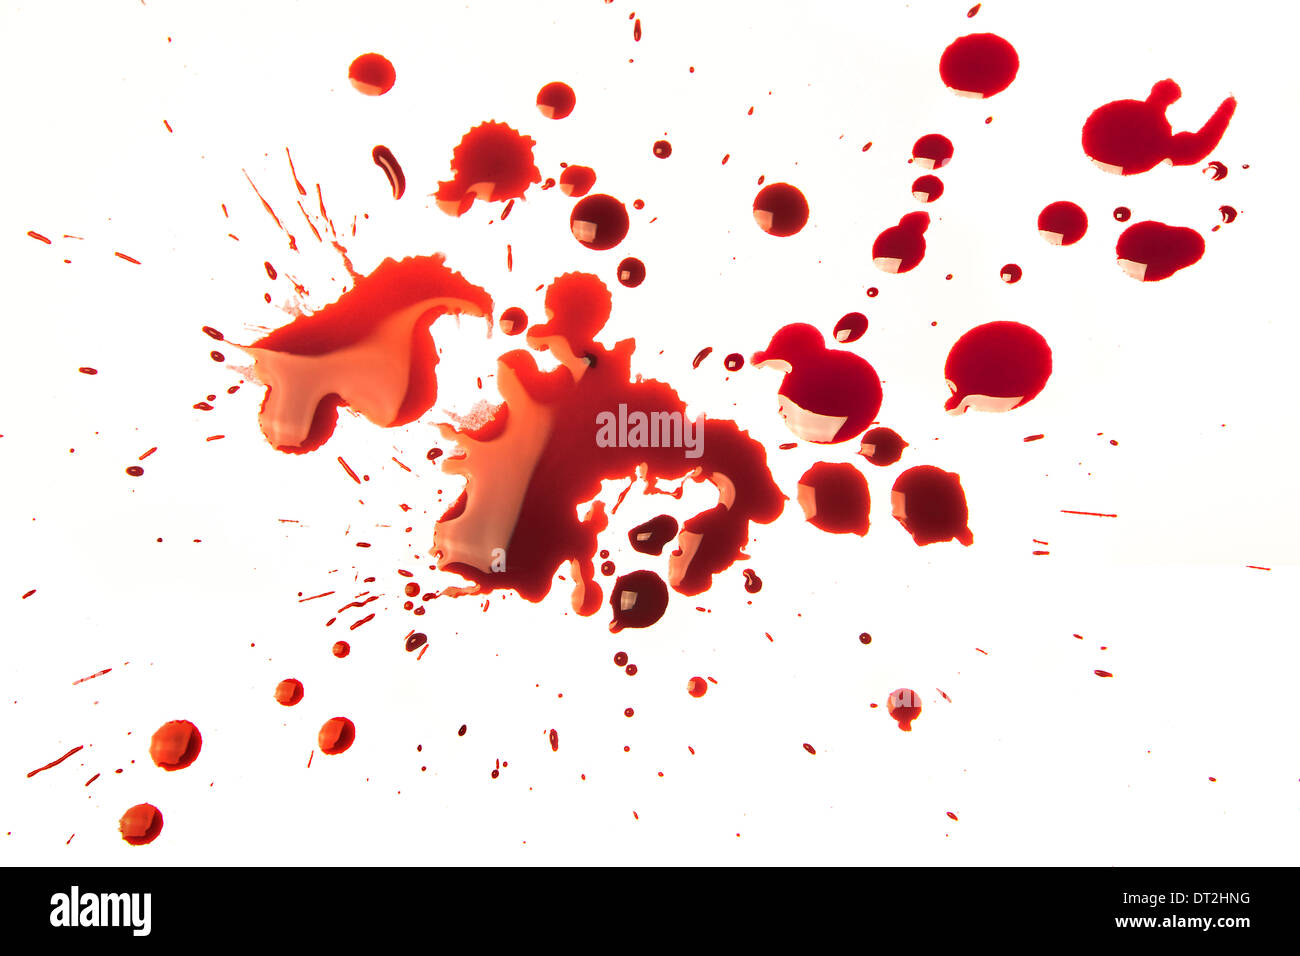 Splattered blood stains on a white background Stock Photo